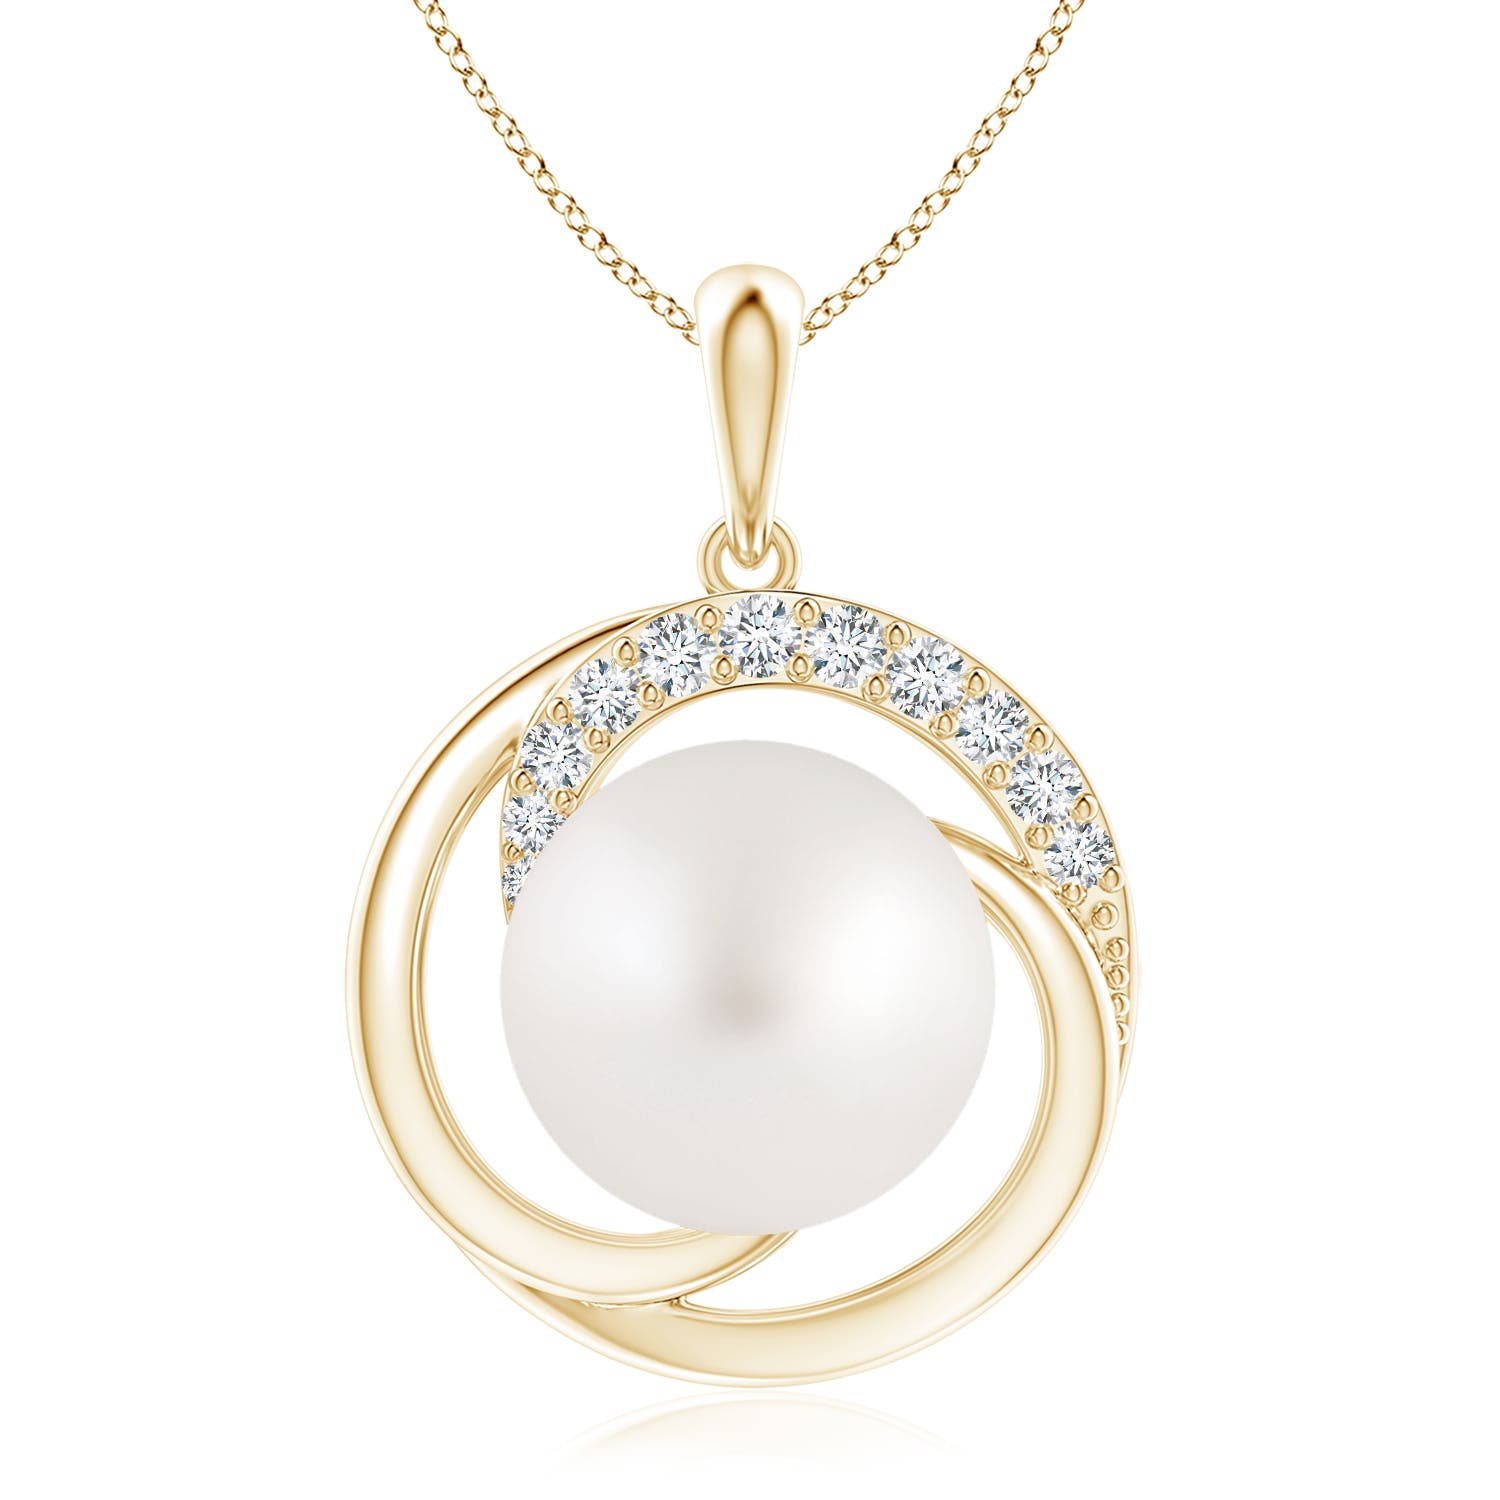 AA - South Sea Cultured Pearl / 9.76 CT / 14 KT Yellow Gold